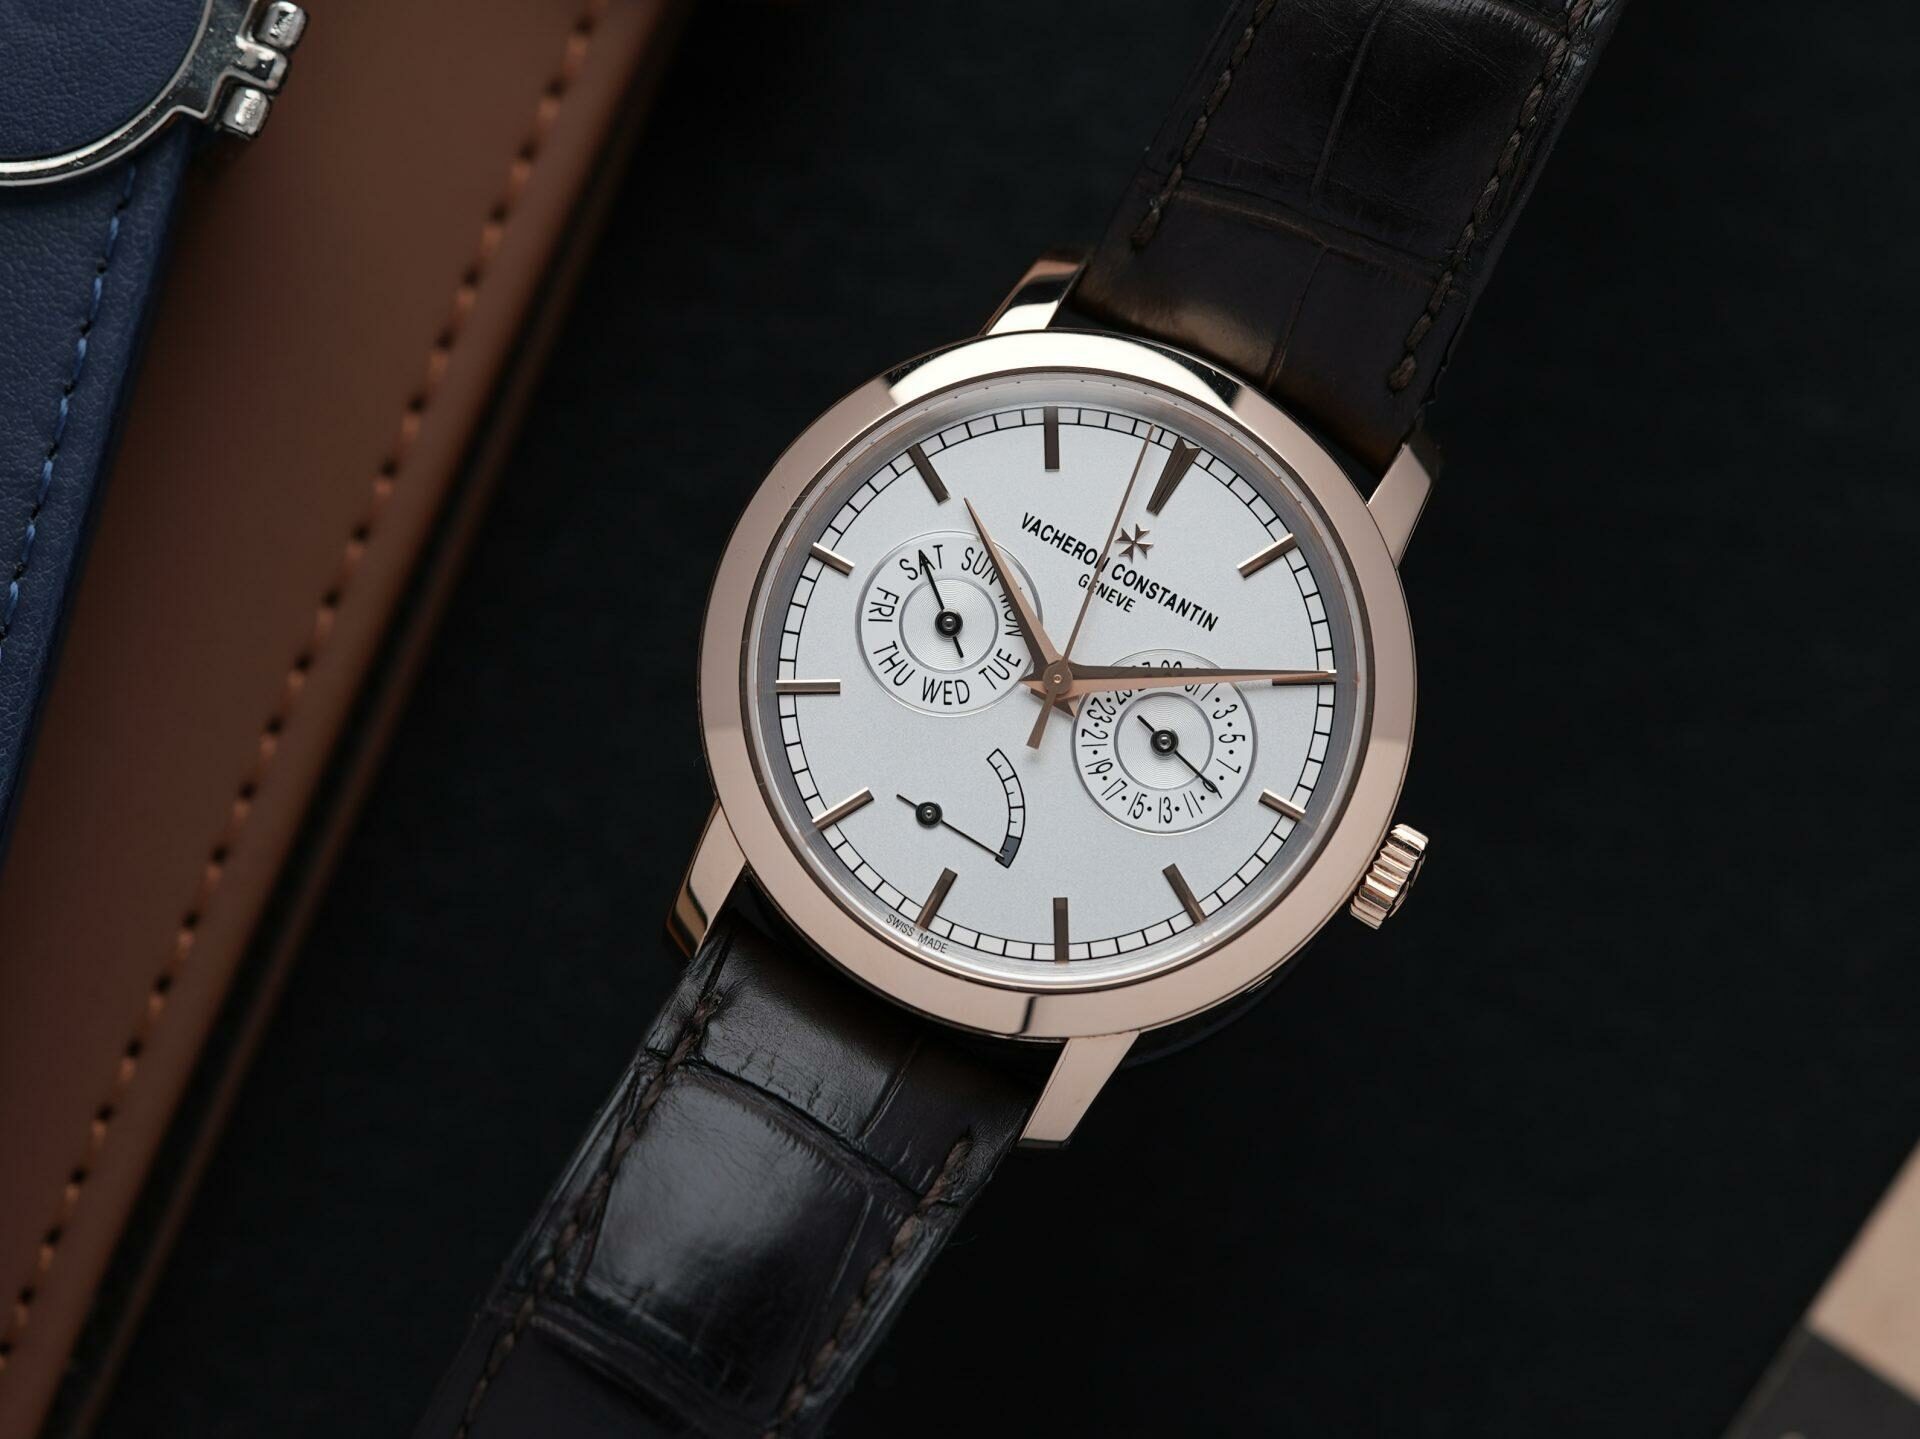 Vacheron Constantin Traditionnelle Day-date - Ticking Way